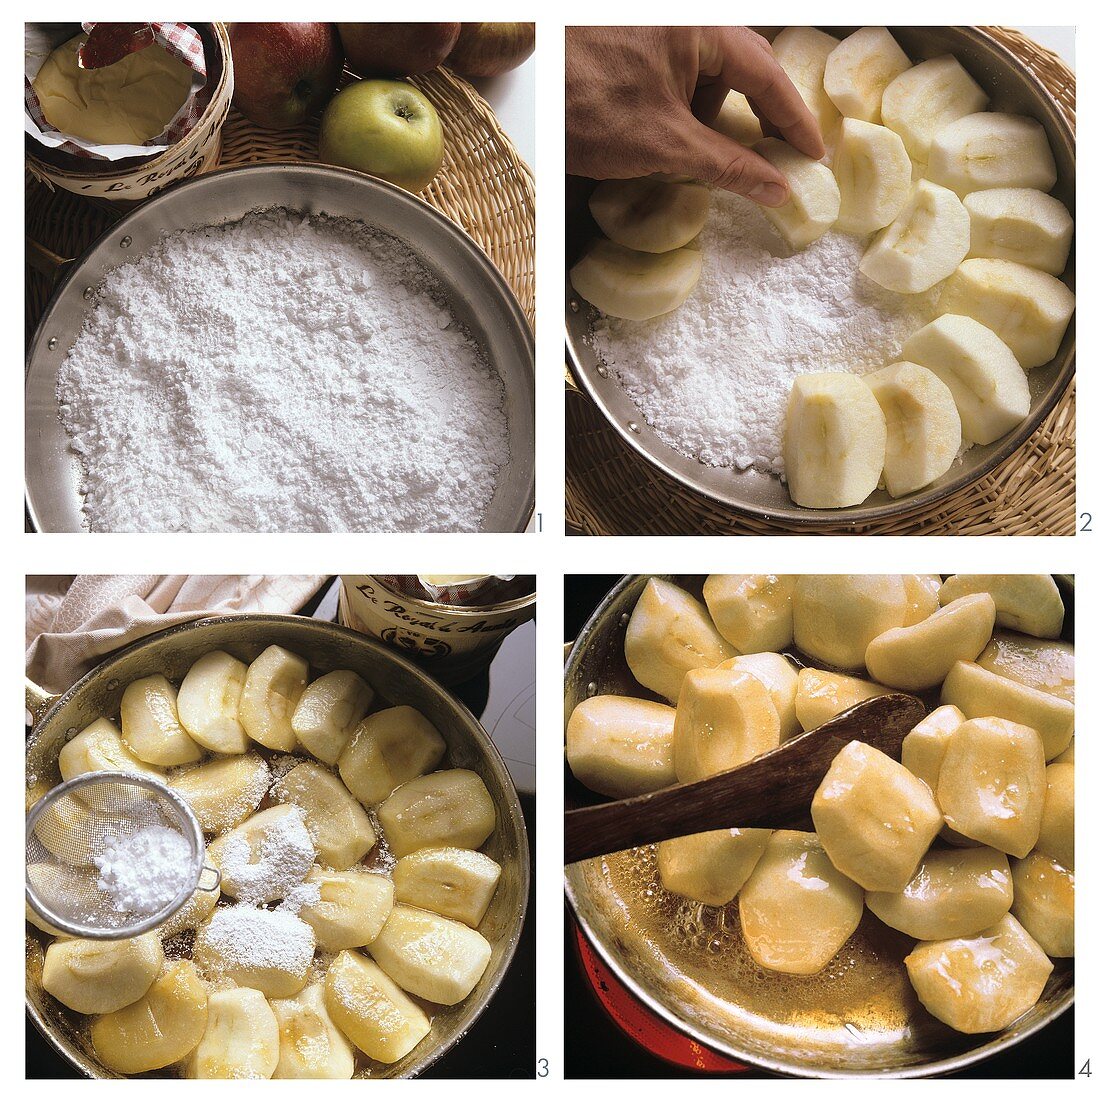 Making apple pie with caramel